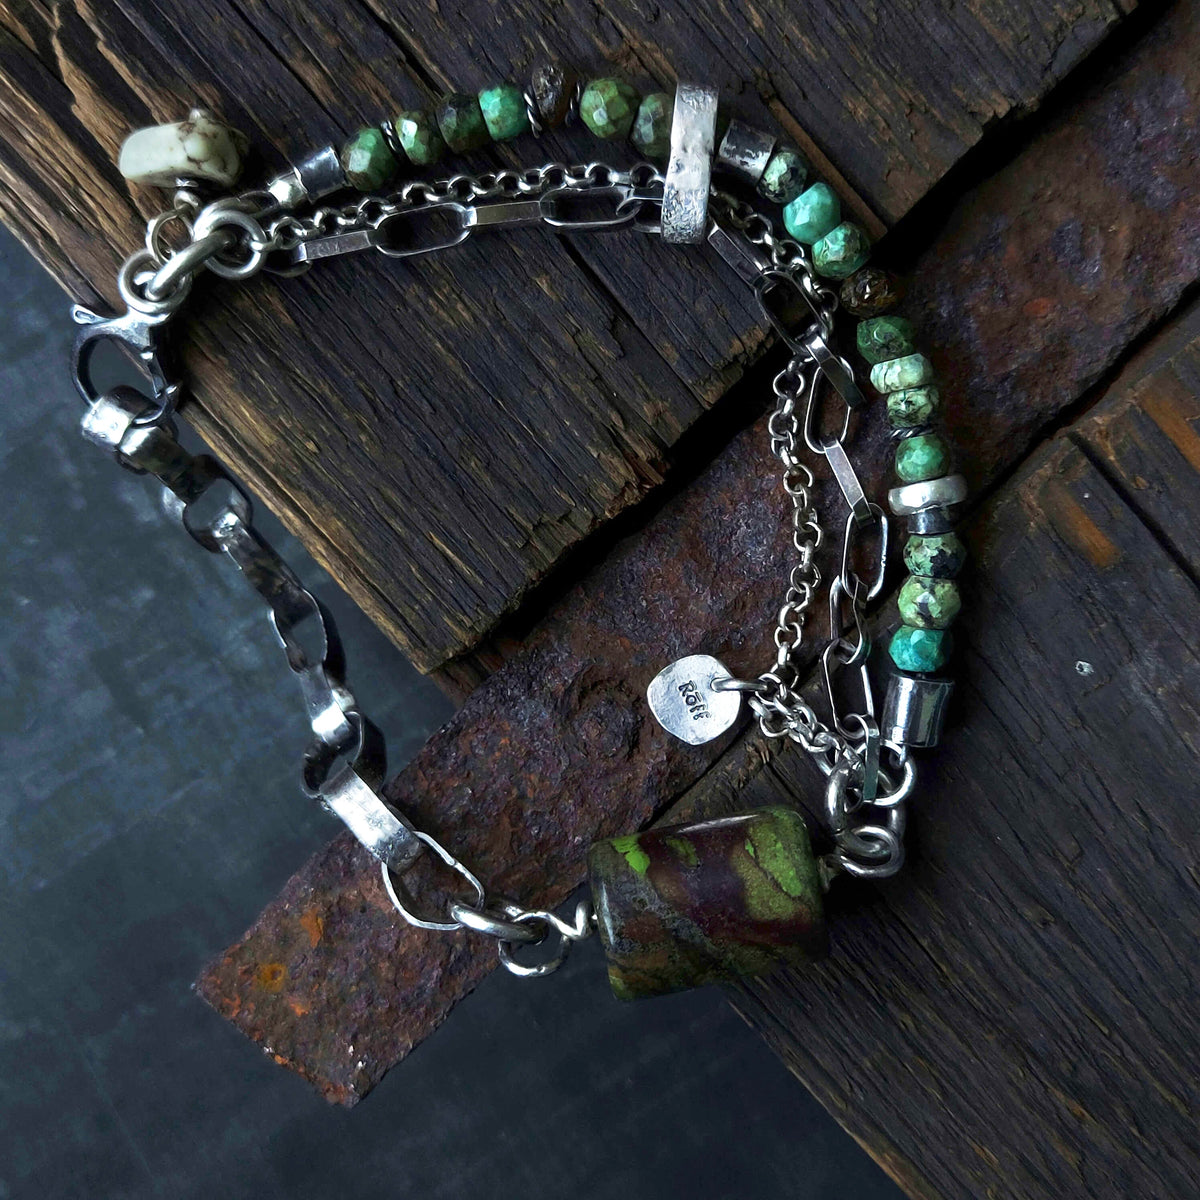 oxidised silver bracelet with white pebble charm, silver chains, handmade silver bracelet with turquoise gemstone beads, silver beads and raw amber beads, suitable for men and women